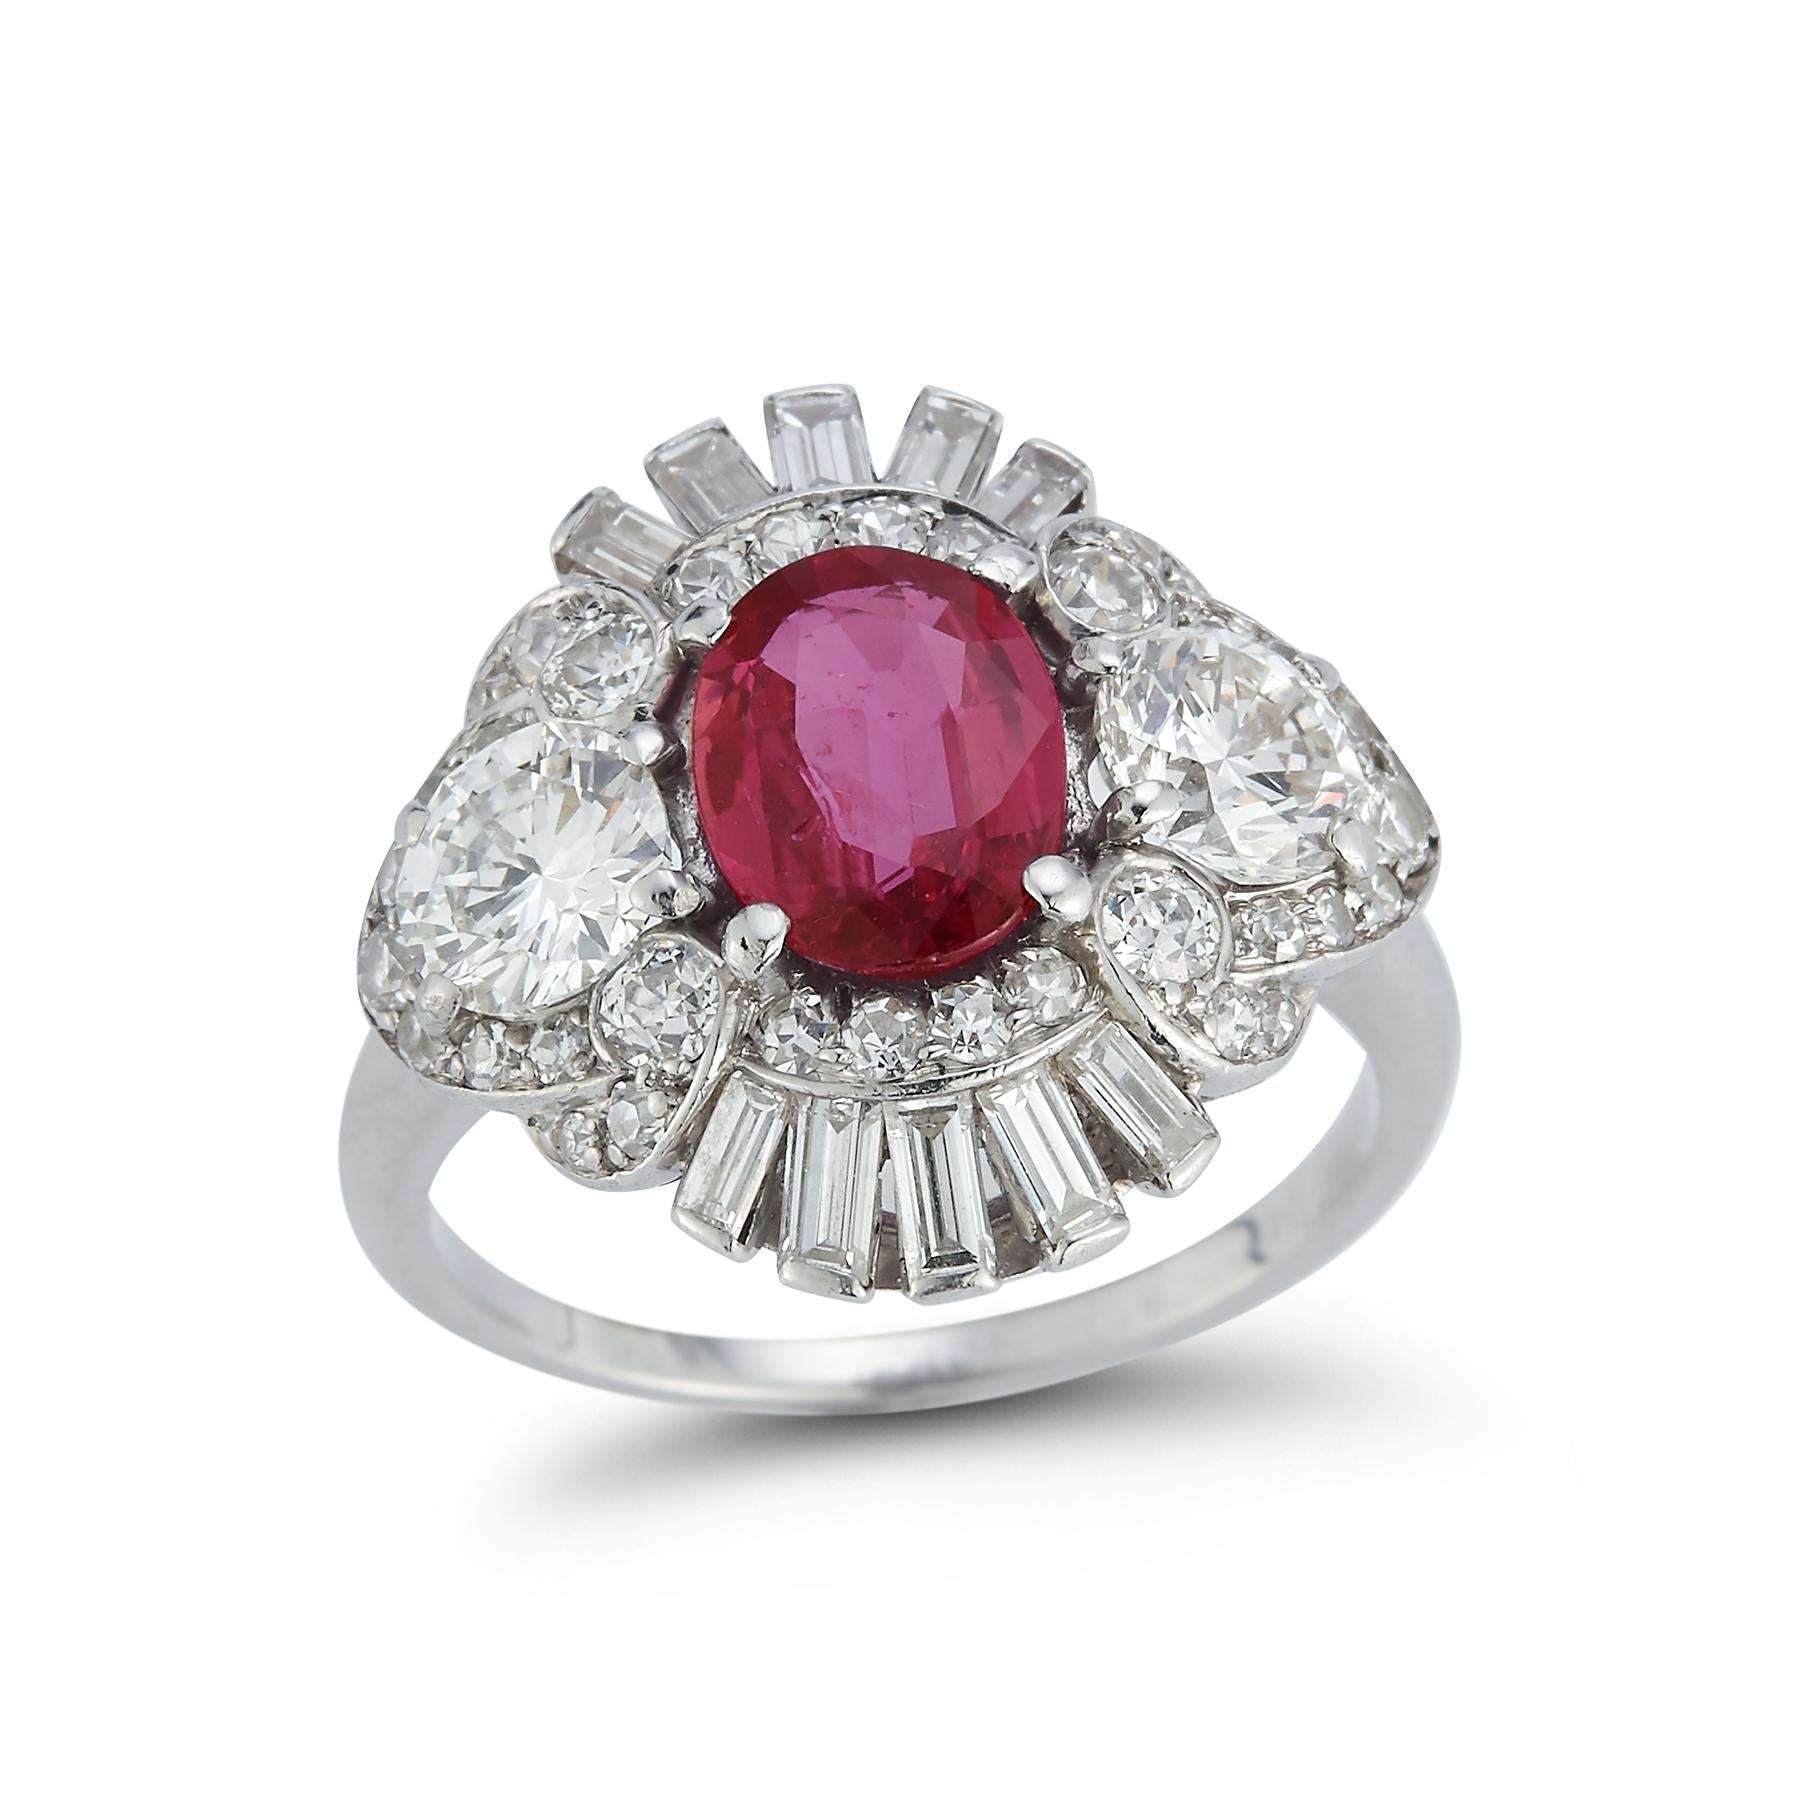  Art Deco Certified Oval Cut Ruby & Diamond Ring

Ruby Weight: approximately 2.29 cts

Round Cut Diamond Weight: 1.38 cts 

Ring Size: 5.5

Re sizable free of charge

Gold Type: 14K White Gold 